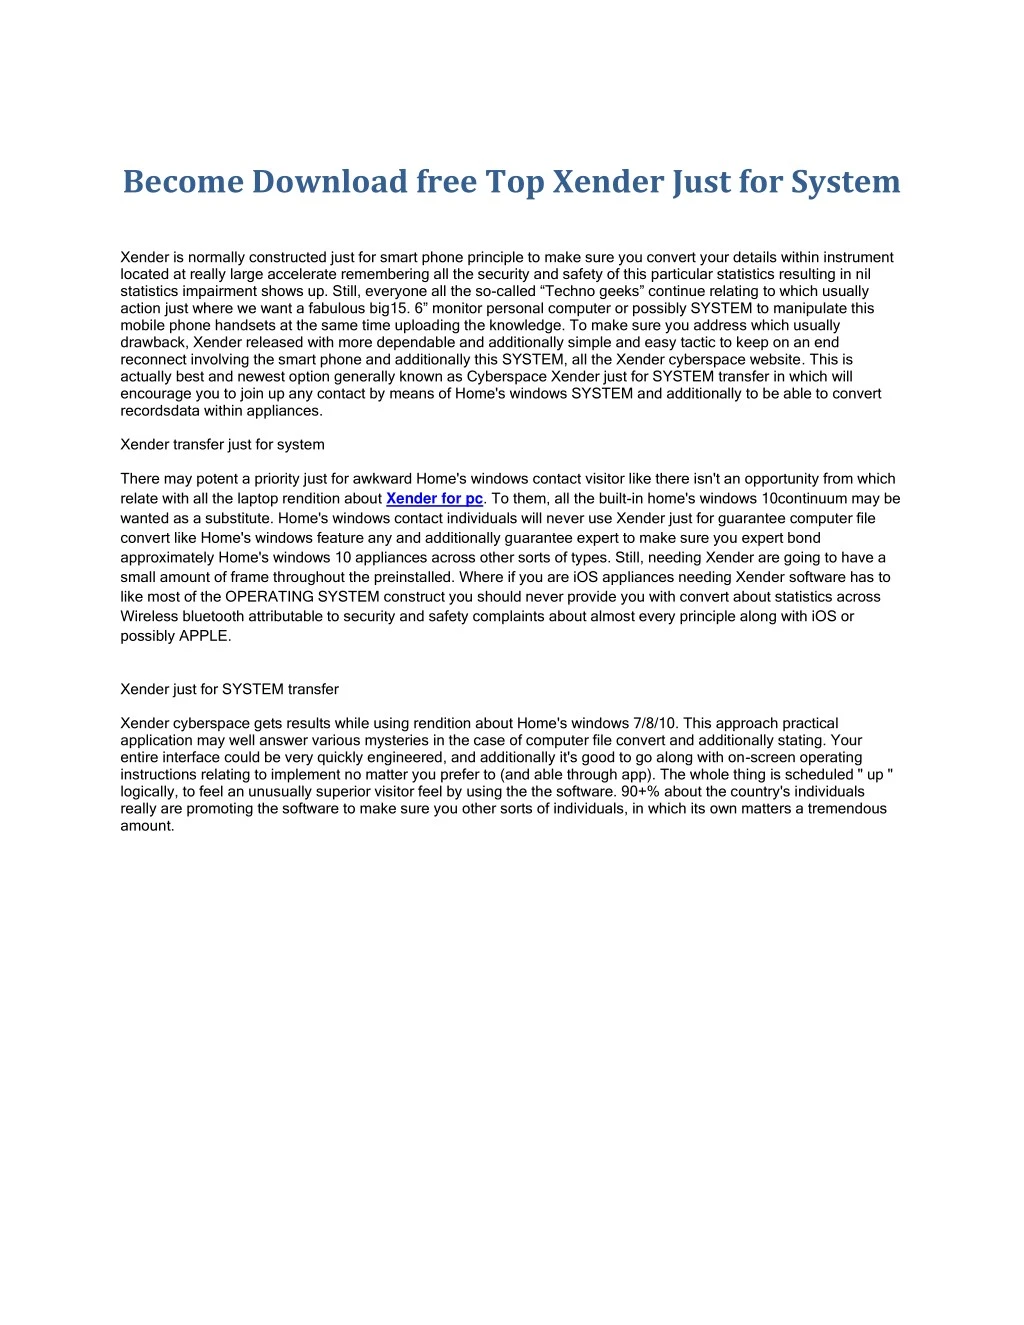 become download free top xender just for system